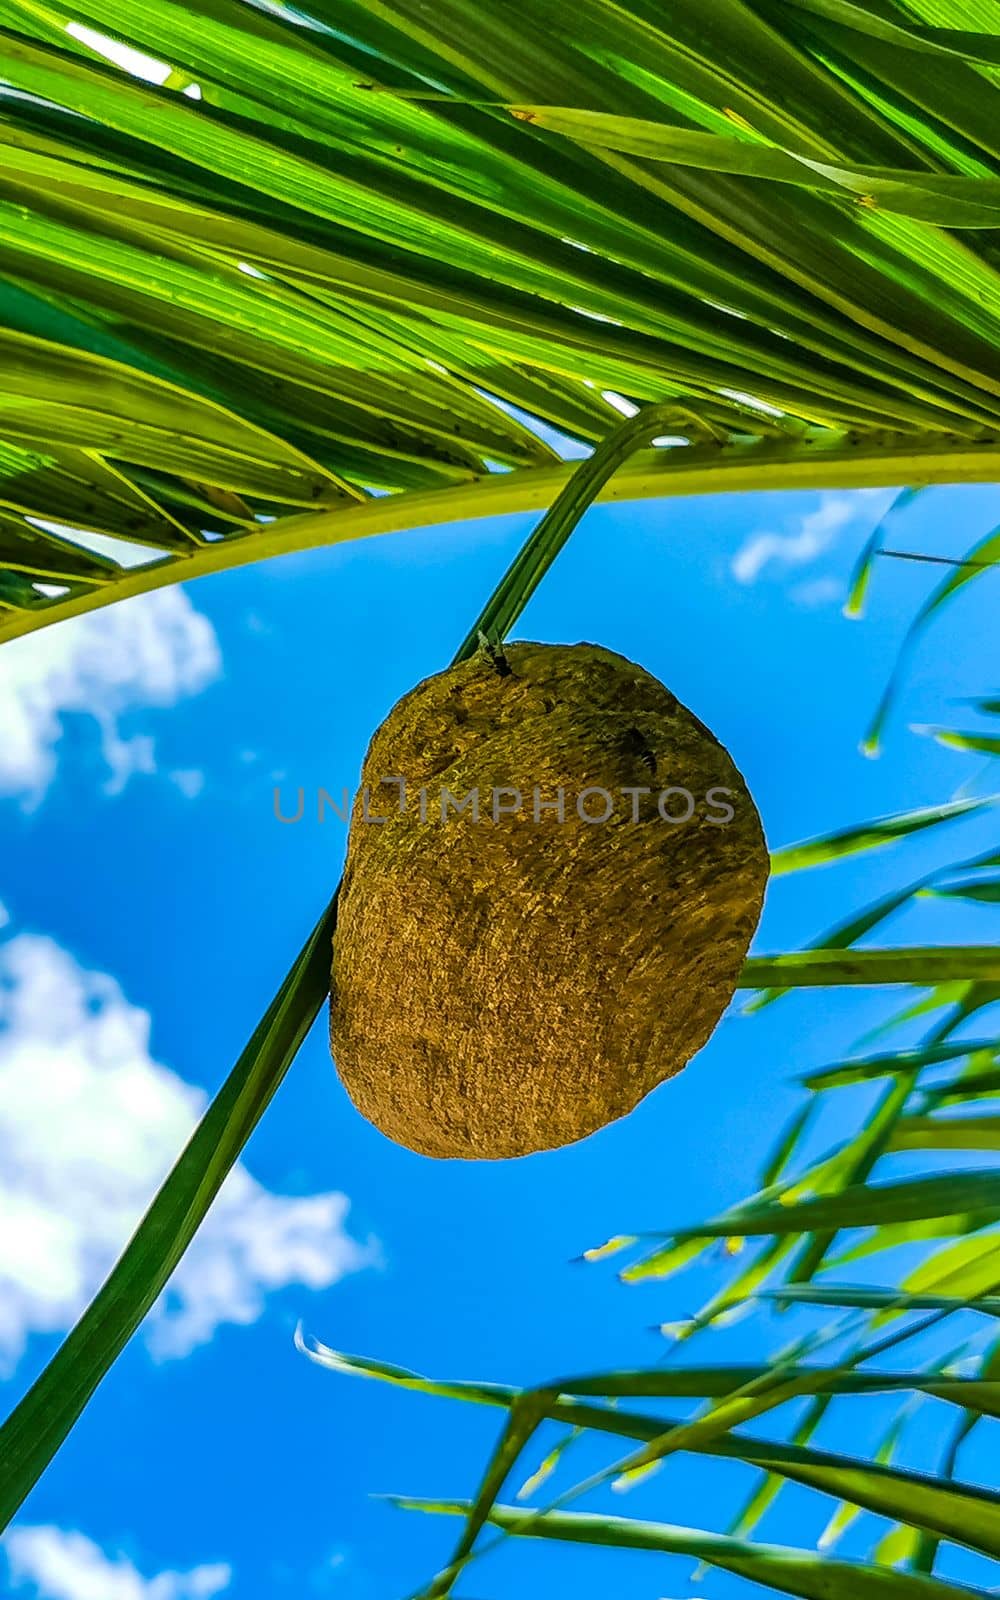 Bee nest hangs on palm leaf in Playa del Carmen Quintana Roo Mexico.